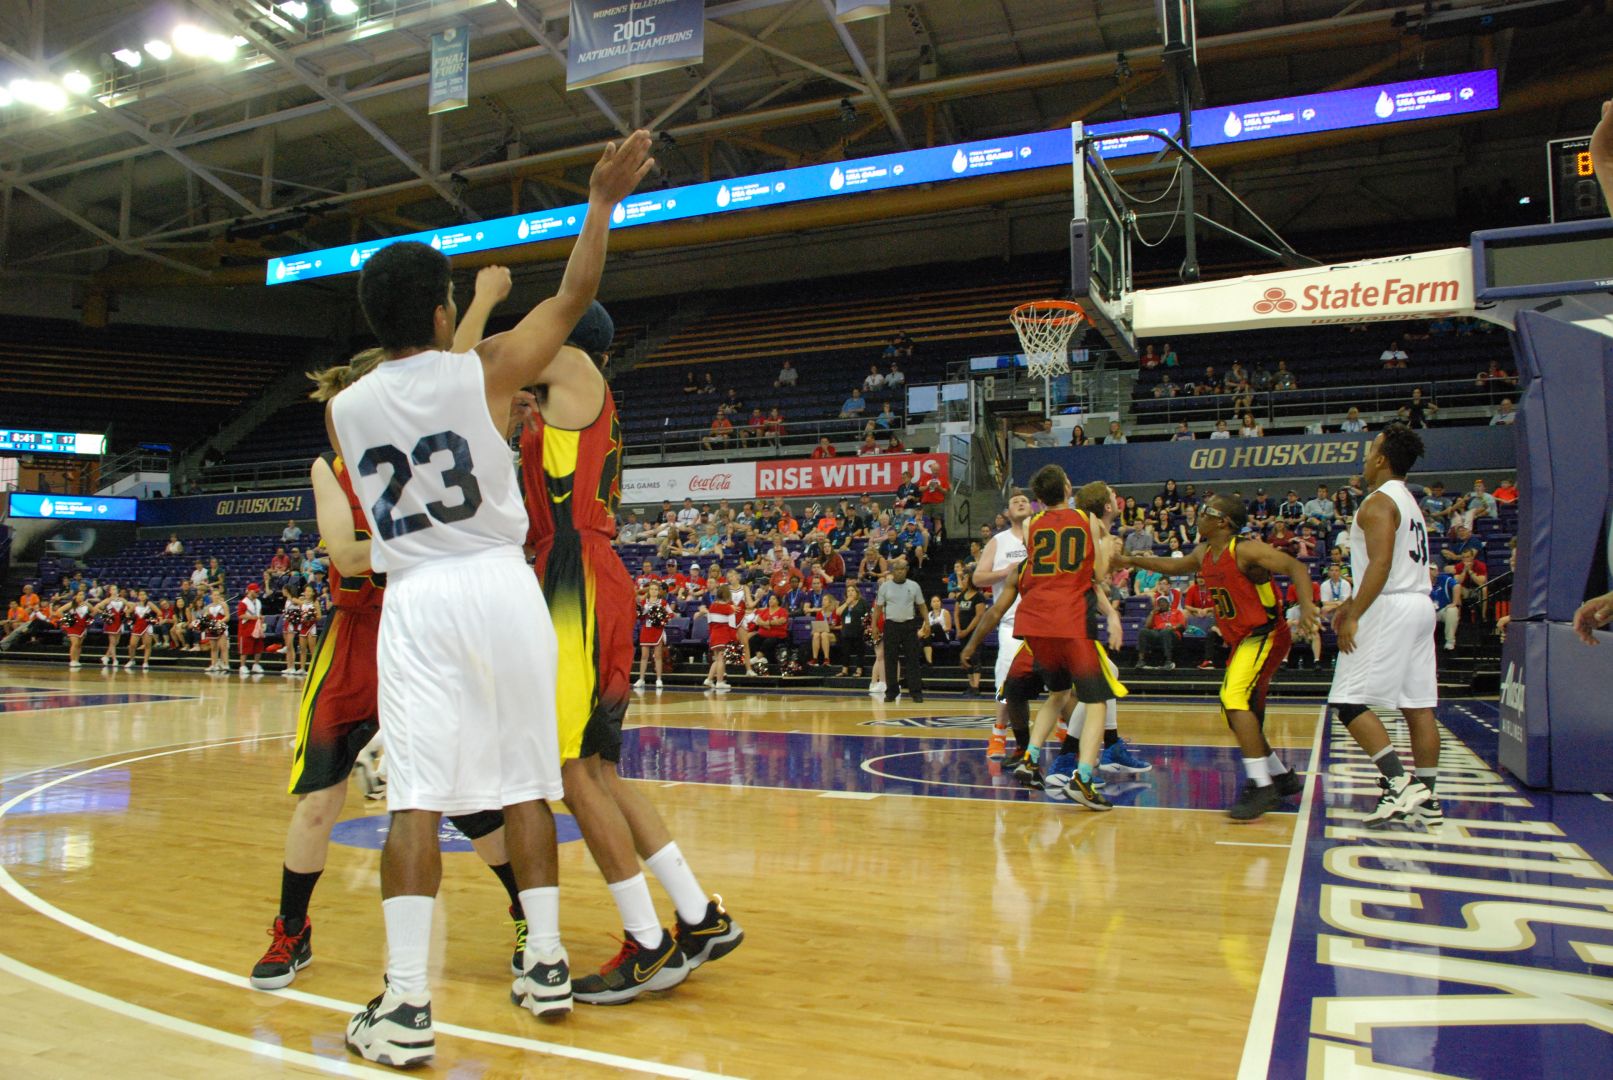 Colton Lohrenz shoots a three-point shot during the championship game against Maryland